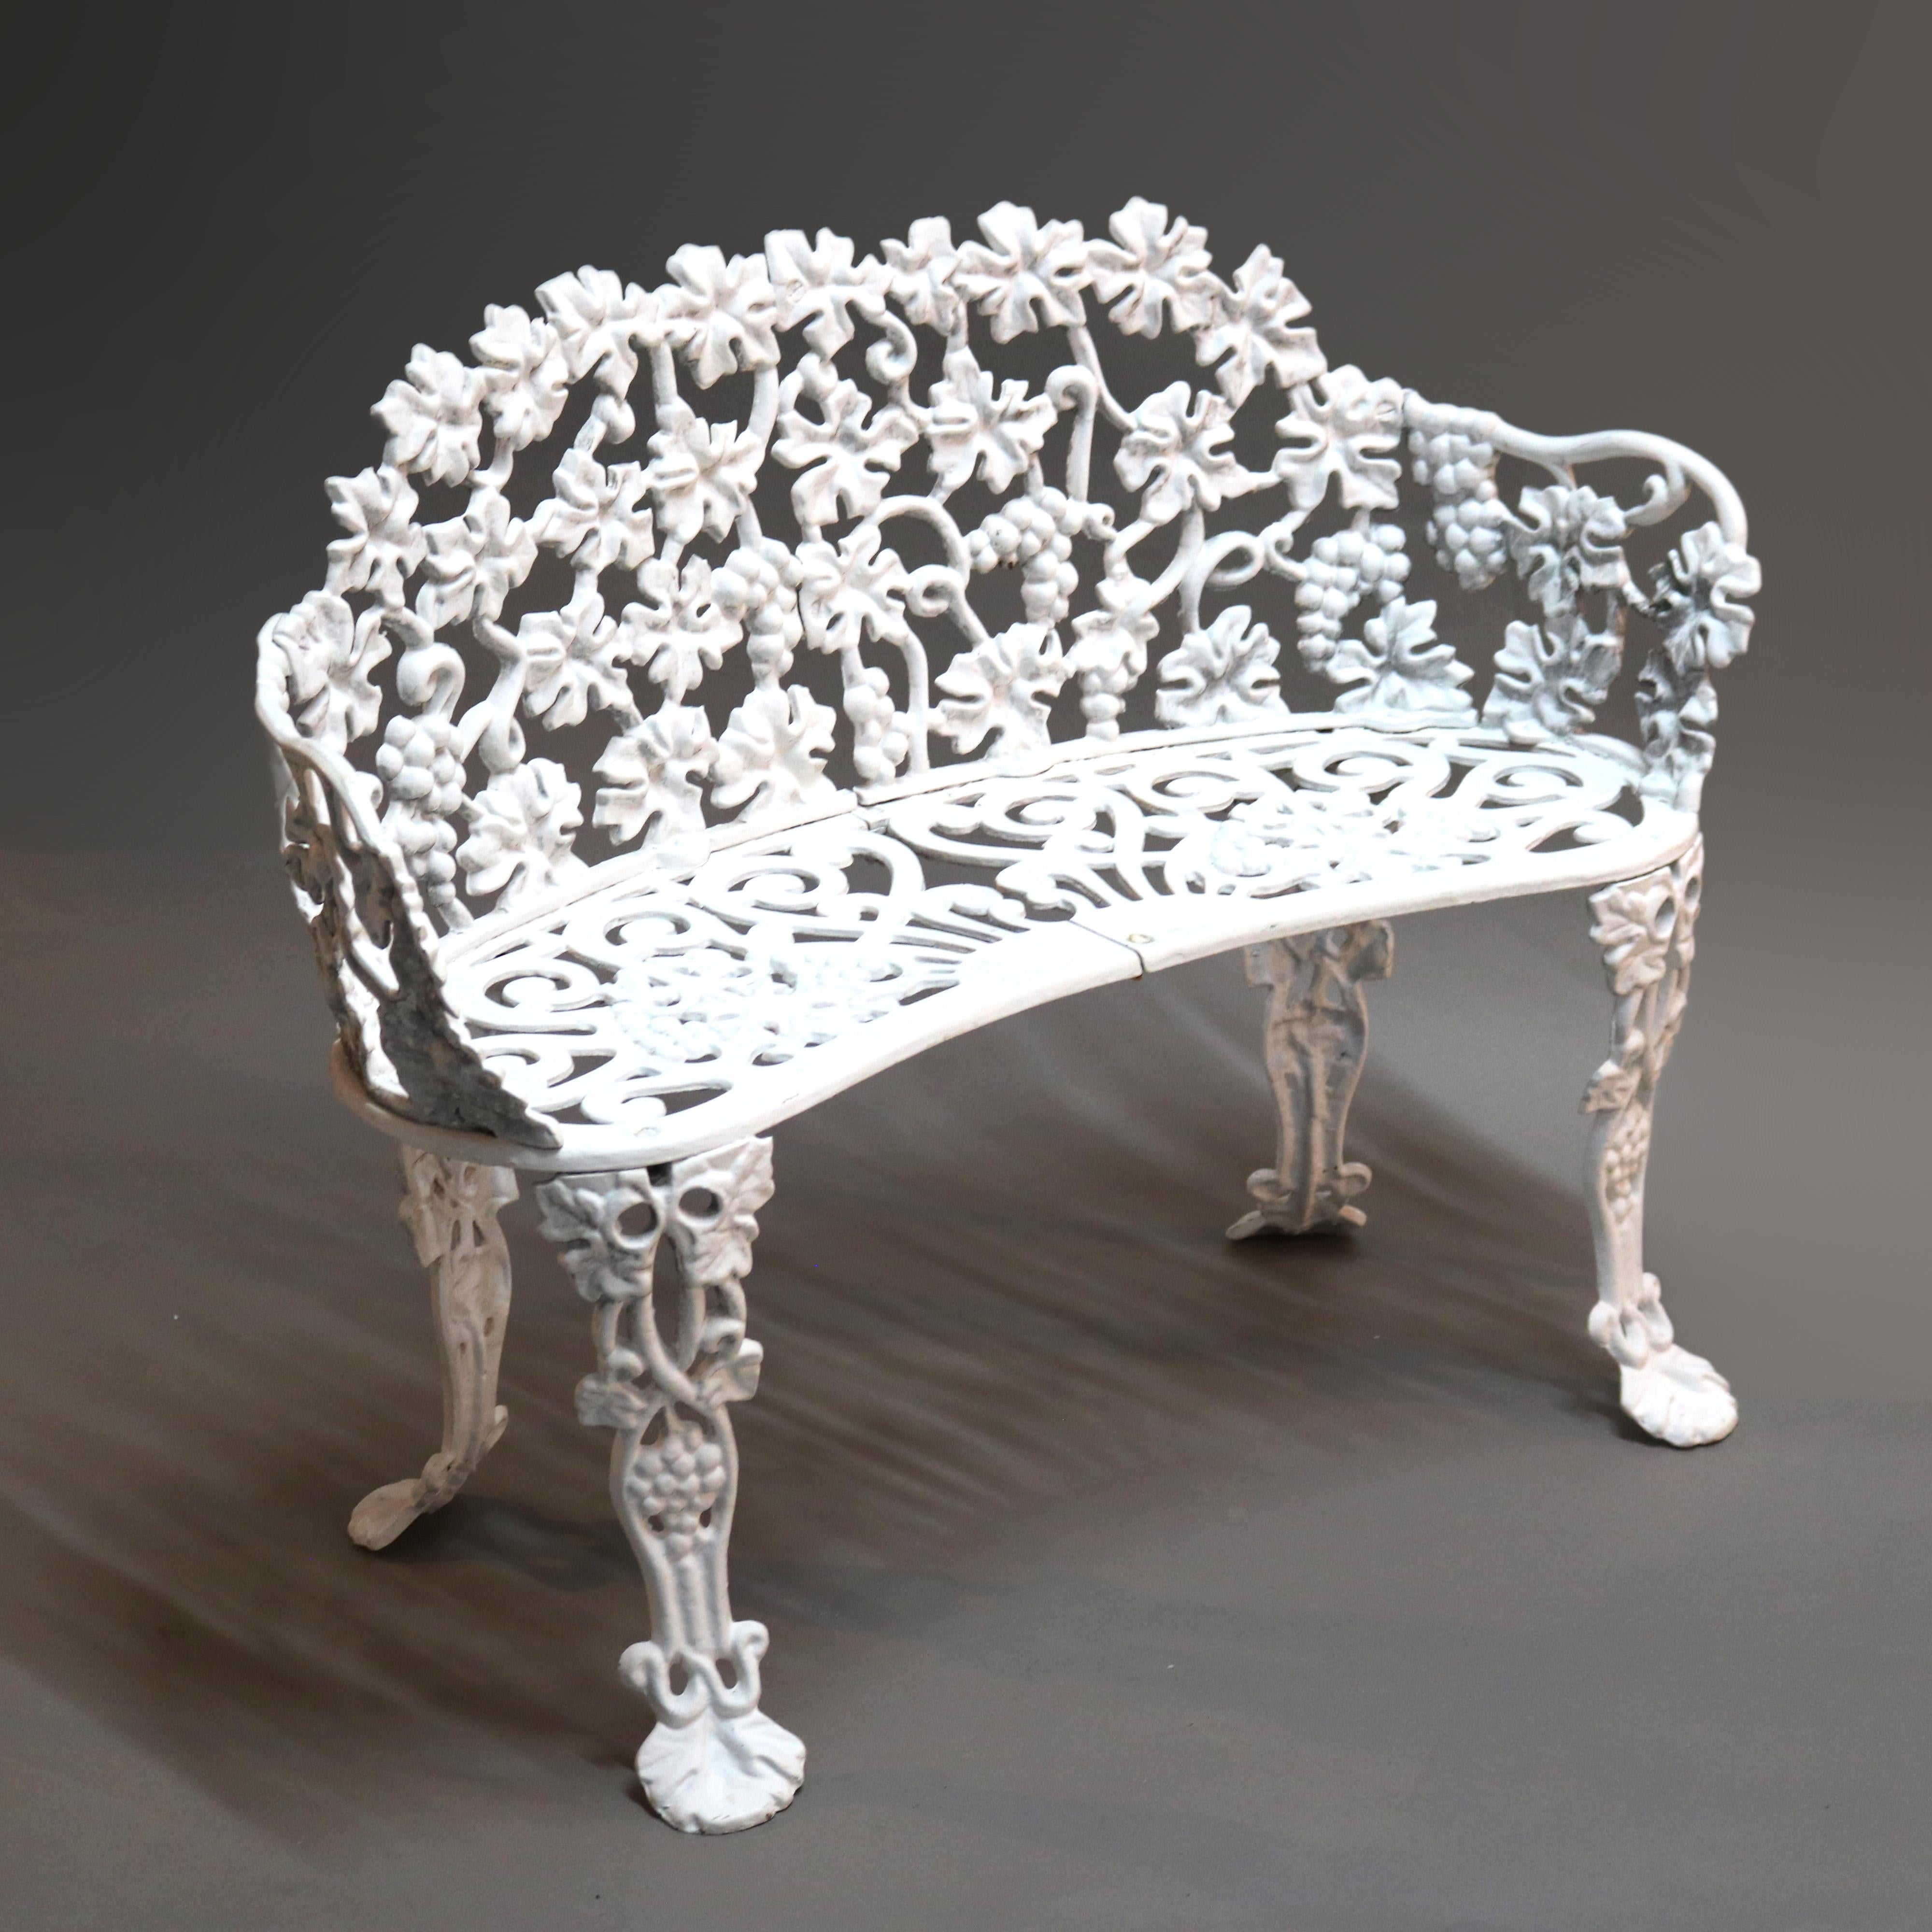 A cast metal garden bench offers grape and leaf form, painted white, 20th century

Measures - 29.5''H x 38.25''W x 19.25''D

Catalogue Note: Ask about DISCOUNTED DELIVERY RATES available to most regions within 1,500 miles of New York.